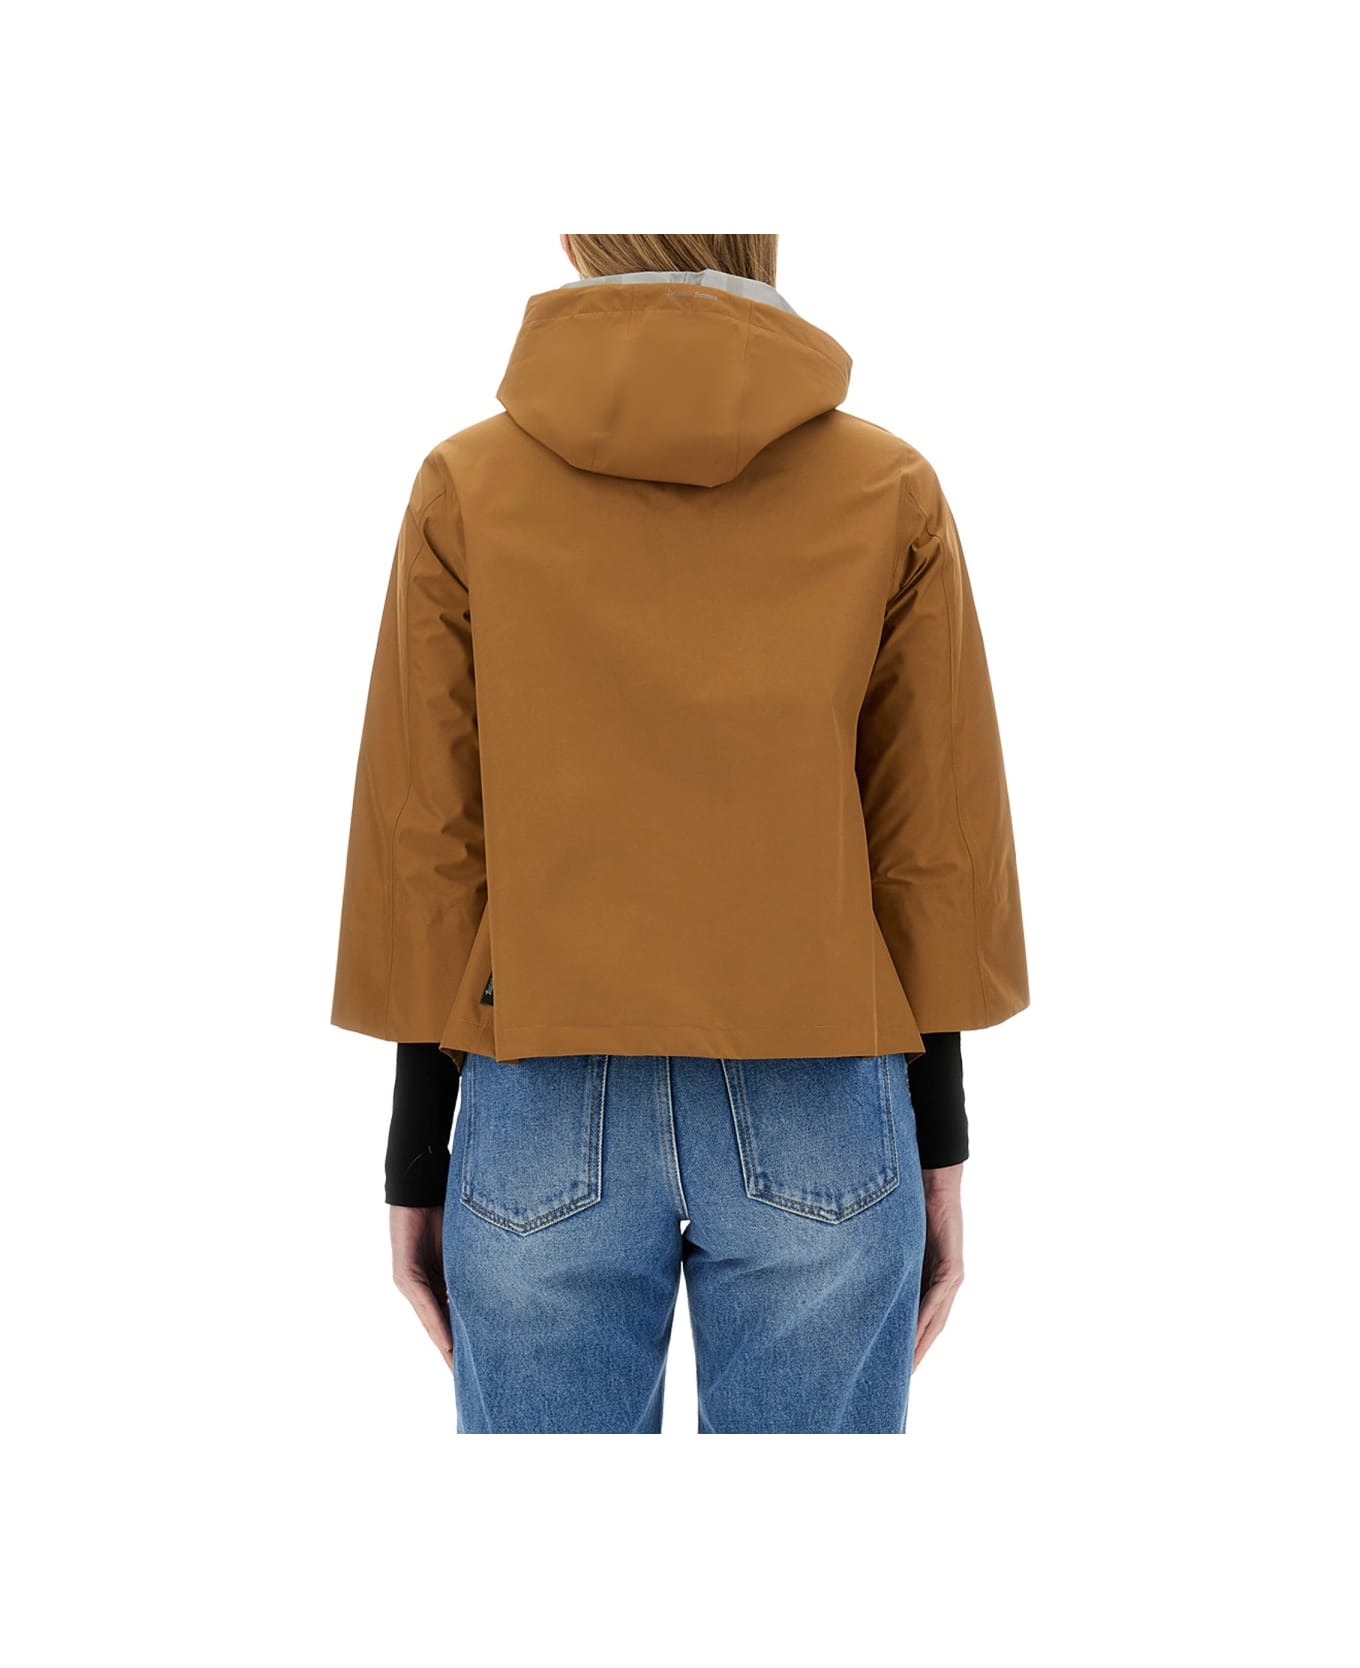 Herno Hooded Cape - BEIGE